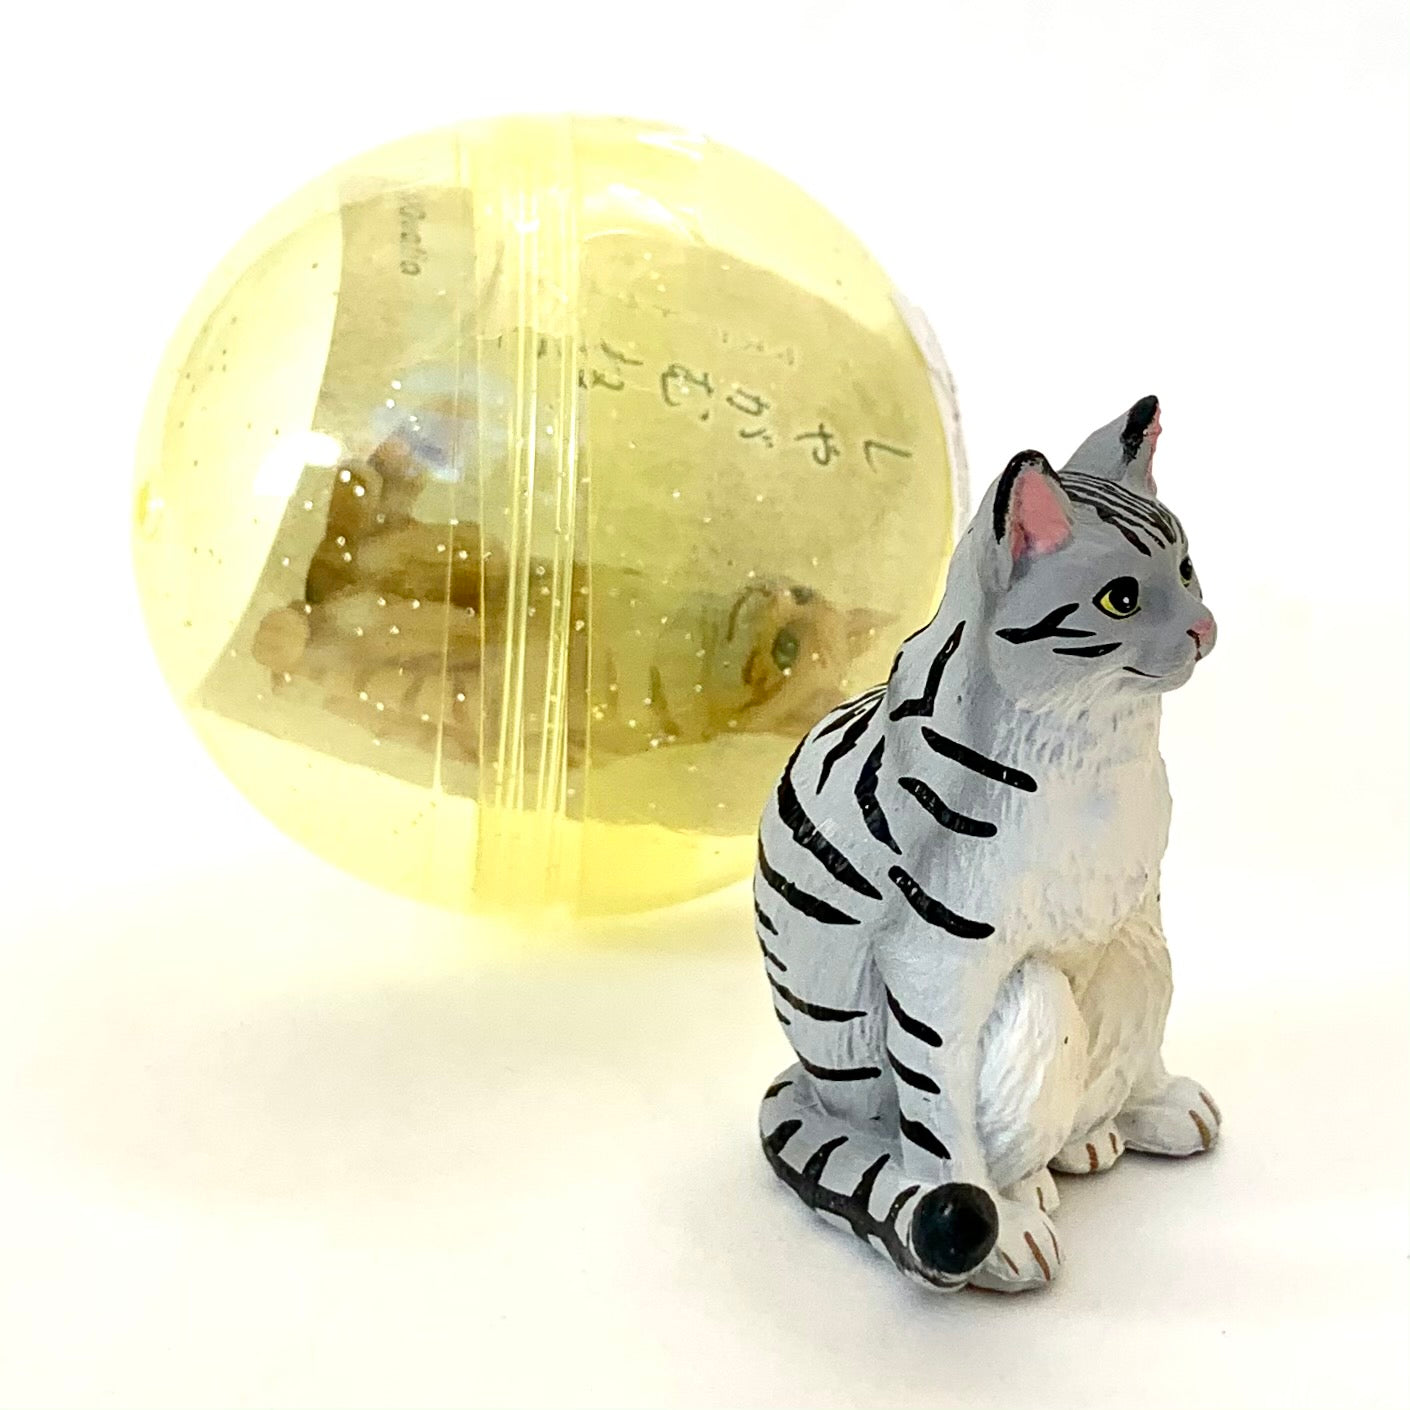 X 70751 FISHING CATS BLIND BOX-DISCONTINUED – BCmini